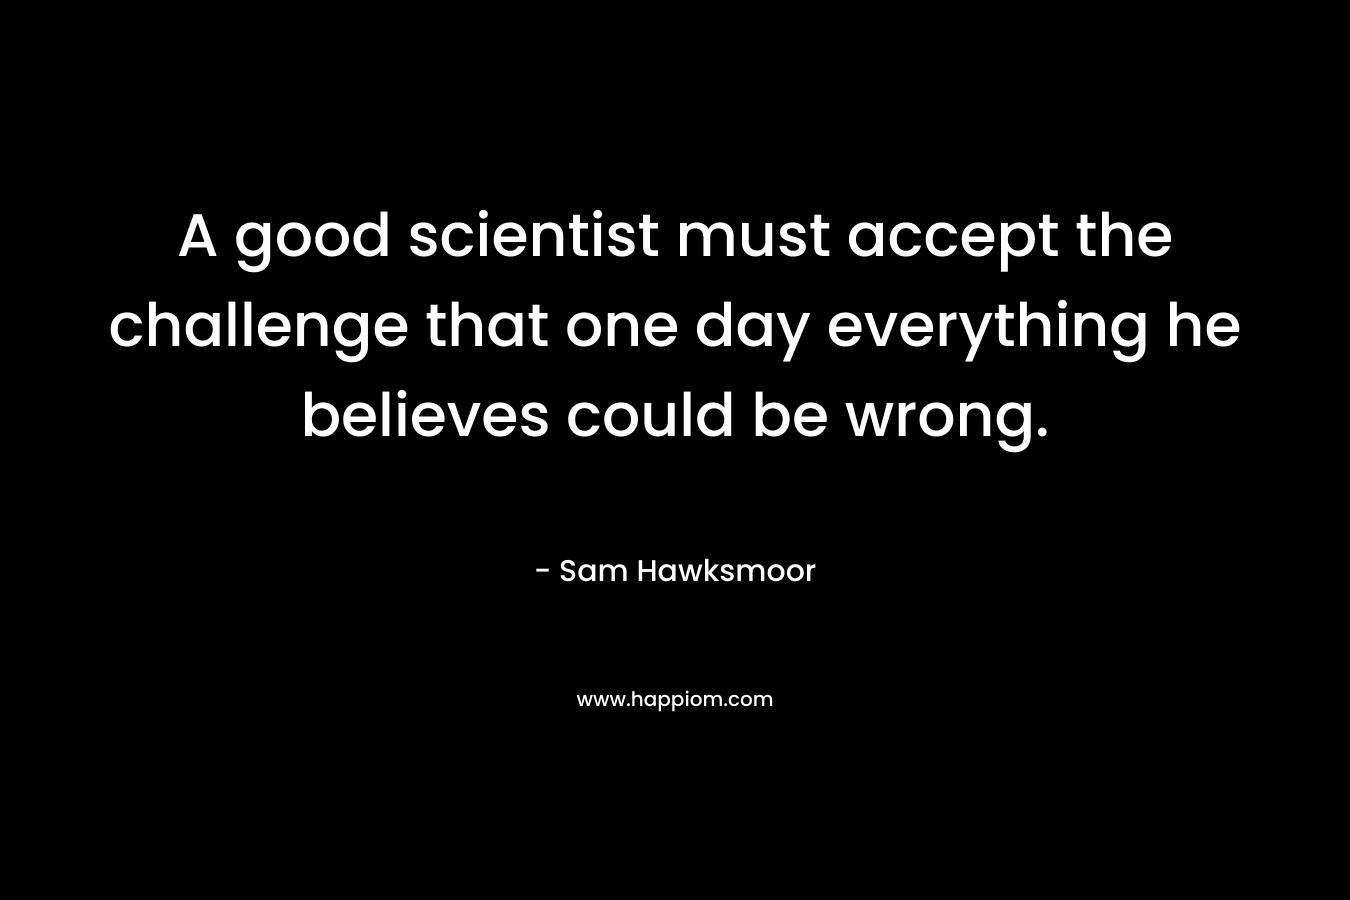 A good scientist must accept the challenge that one day everything he believes could be wrong.